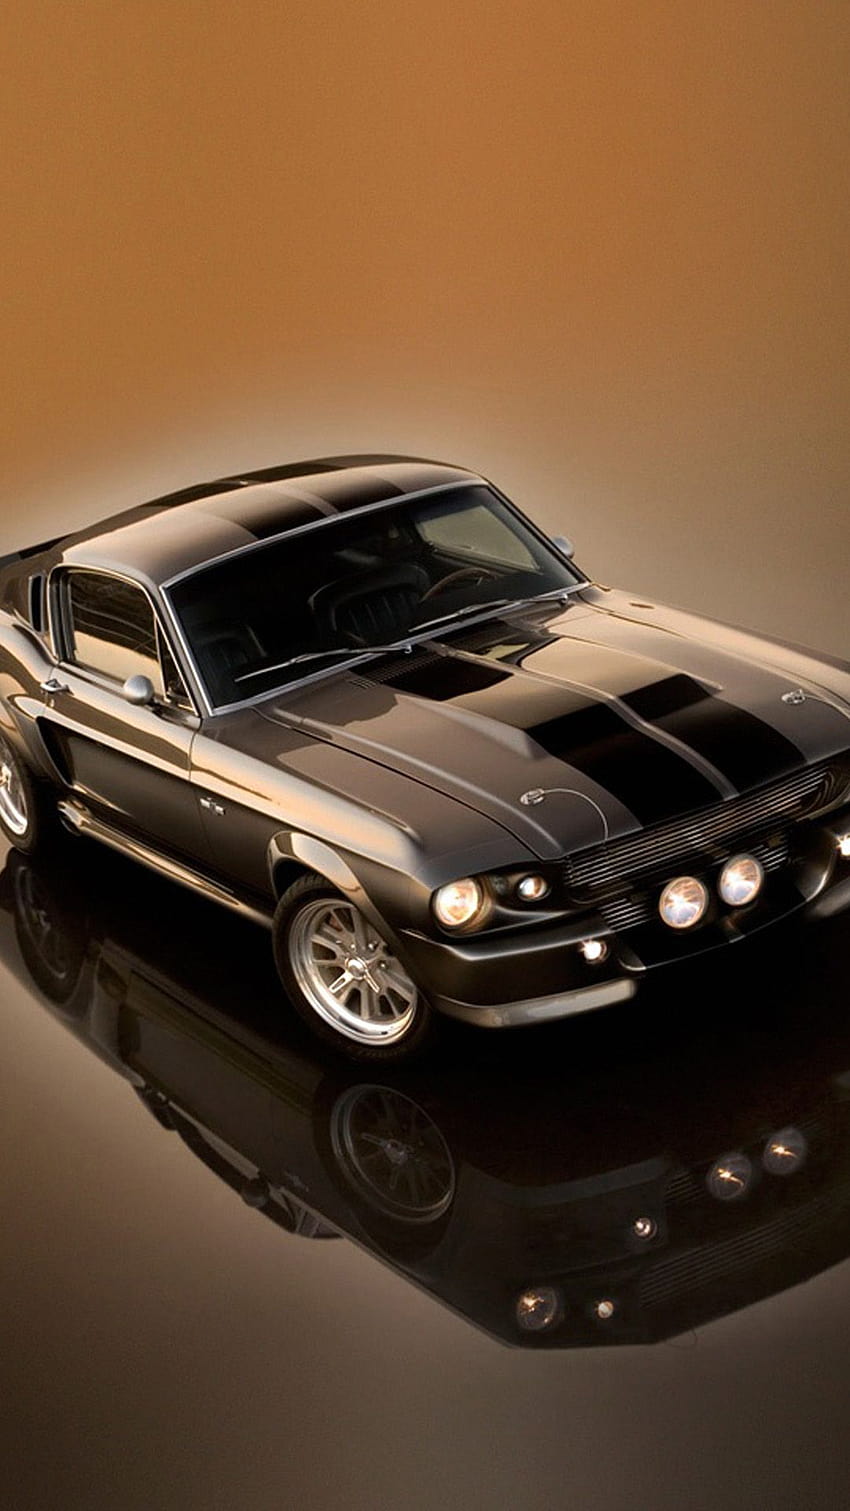 Mustang Shelby Gt500 Eleanor Iphone 6 Iphone, ford mustang 1969 iphone HD phone wallpaper